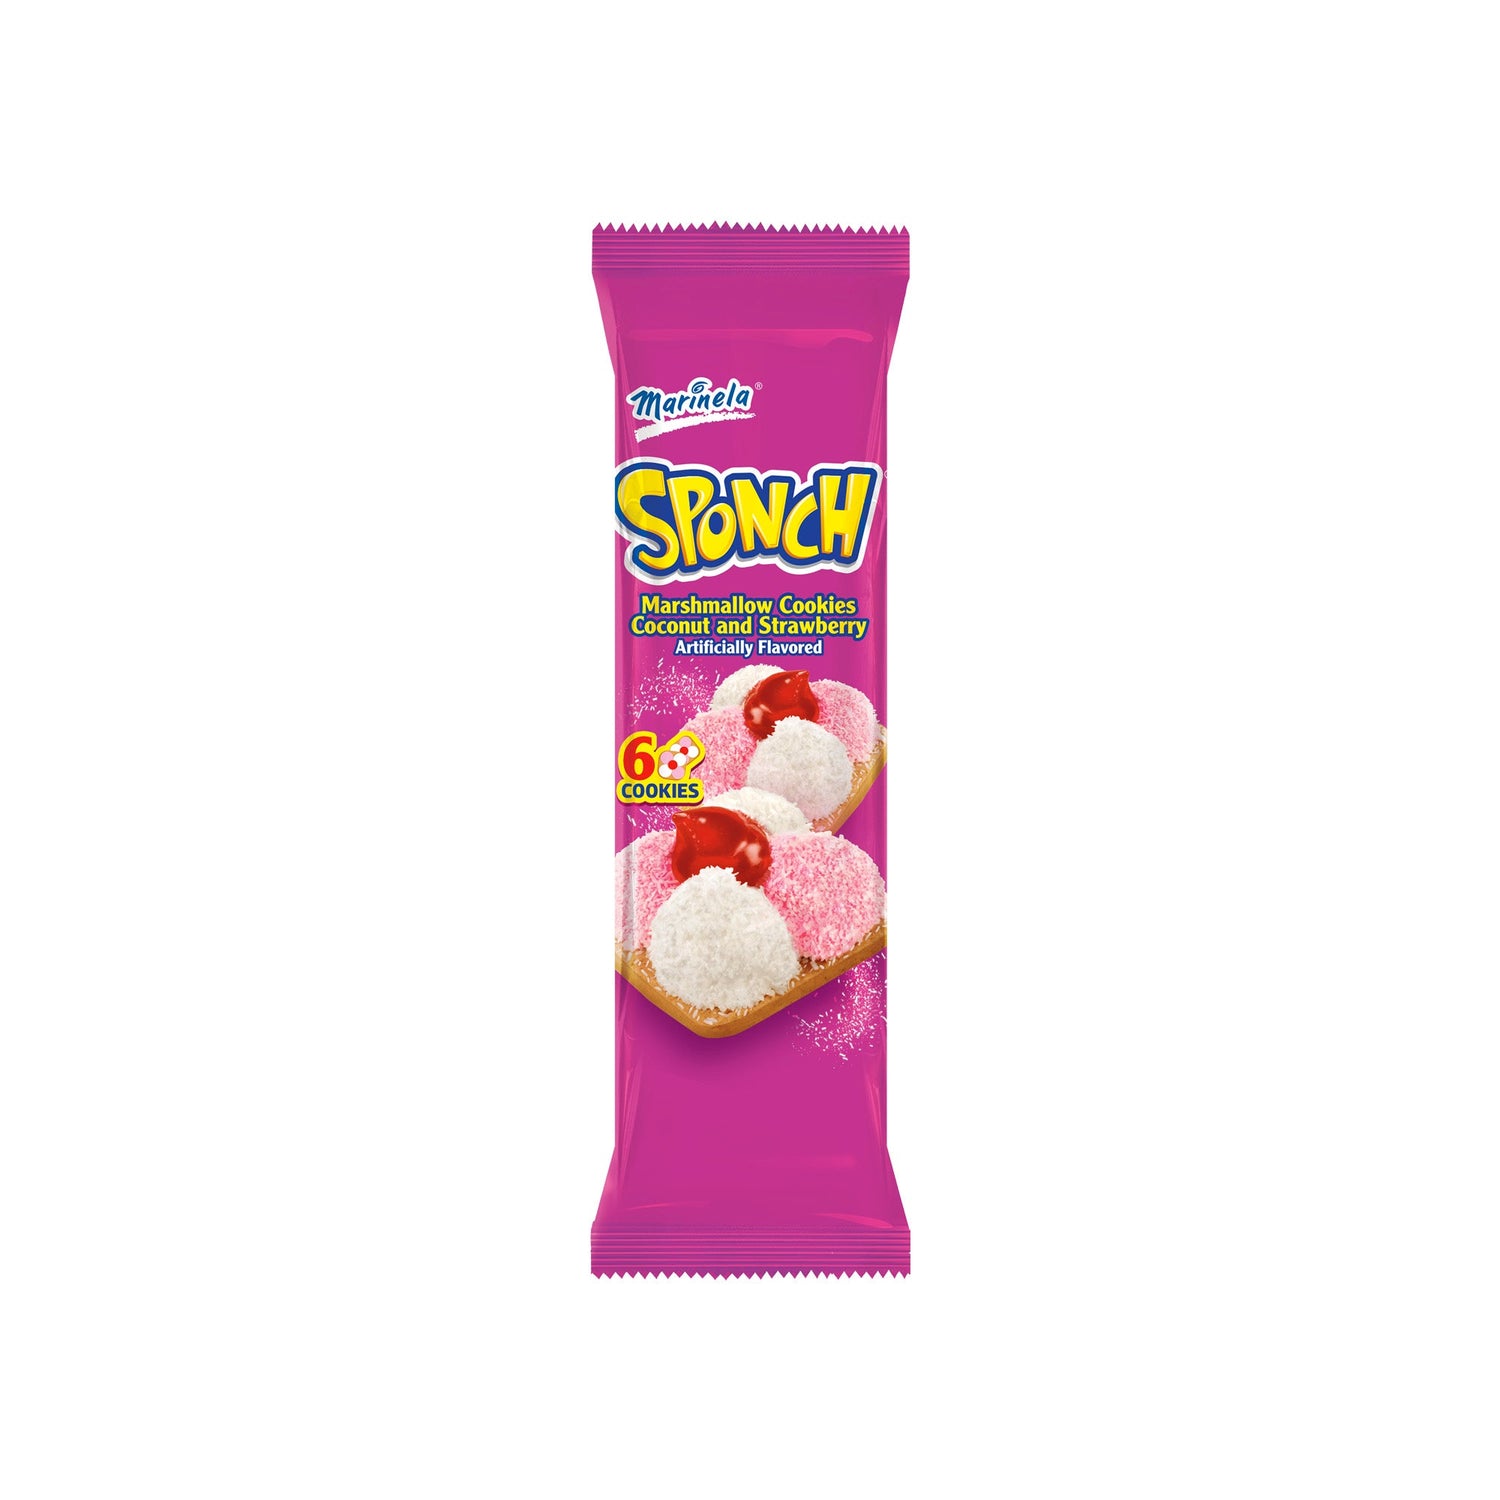 Marinela Sponch Marshmallow Cookies Coconut And Strawberry Mexico 1245